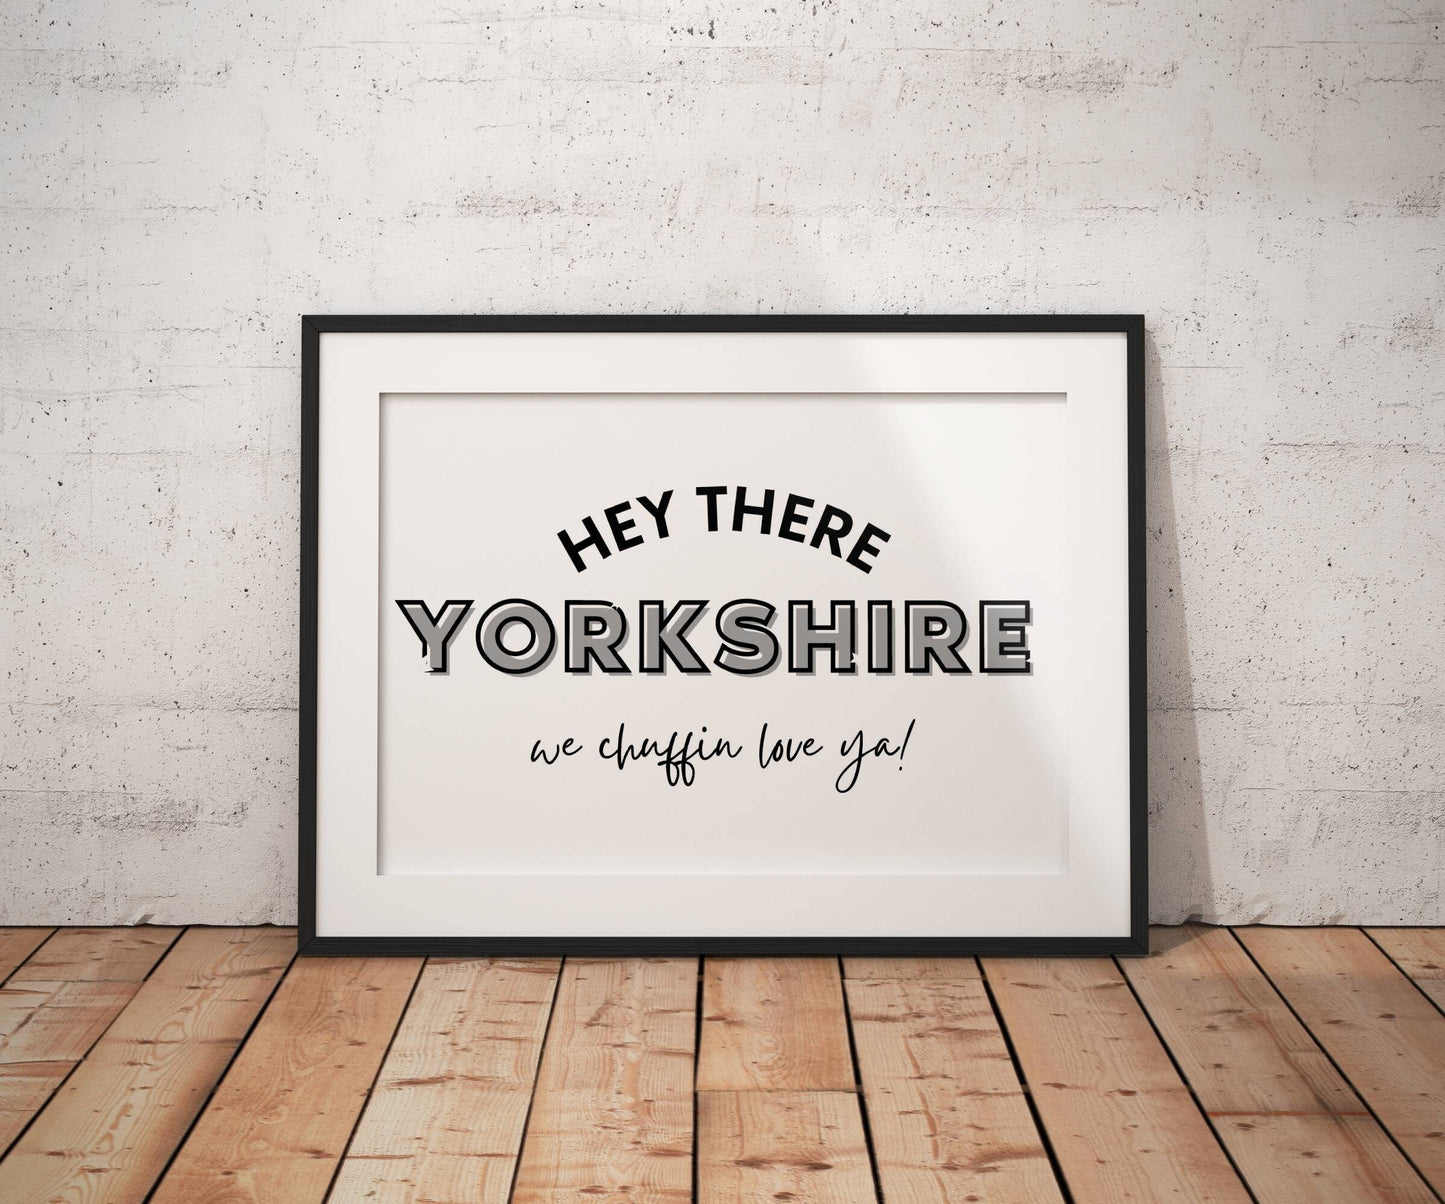 Hey There Yorkshire Print | Yorkshire slang print | We Chuffin Love Ya Print | Yorkshire Print | Home Decor |